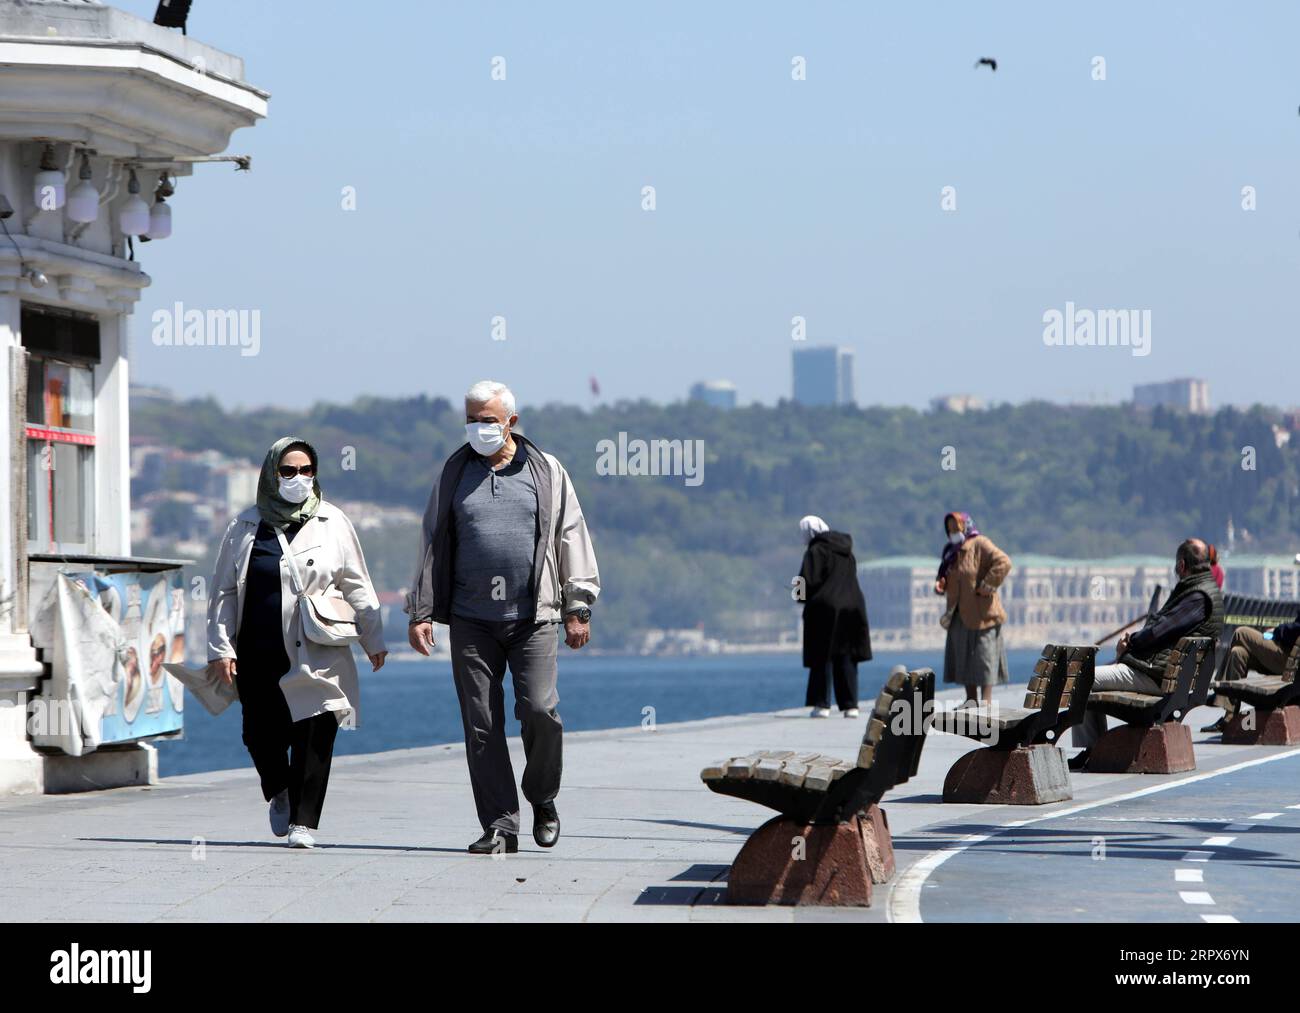 200510 -- ISTANBUL, May 10, 2020 Xinhua -- Elderlies walk on a street in Istanbul, Turkey, on May 10, 2020. Elderlies aged 65 and older across Turkey were allowed outside on Sunday for the first time in seven weeks in an easing of the coronavirus restrictions of the country. Turkey reported 1,542 new cases of COVID-19 and 47 new deaths in the past 24 hours, Health Minister Fahrettin Koca said Sunday. Photo by Osman Orsal/Xinhua TURKEY-ISTANBUL-COVID-19-ELDERLIES PUBLICATIONxNOTxINxCHN Stock Photo